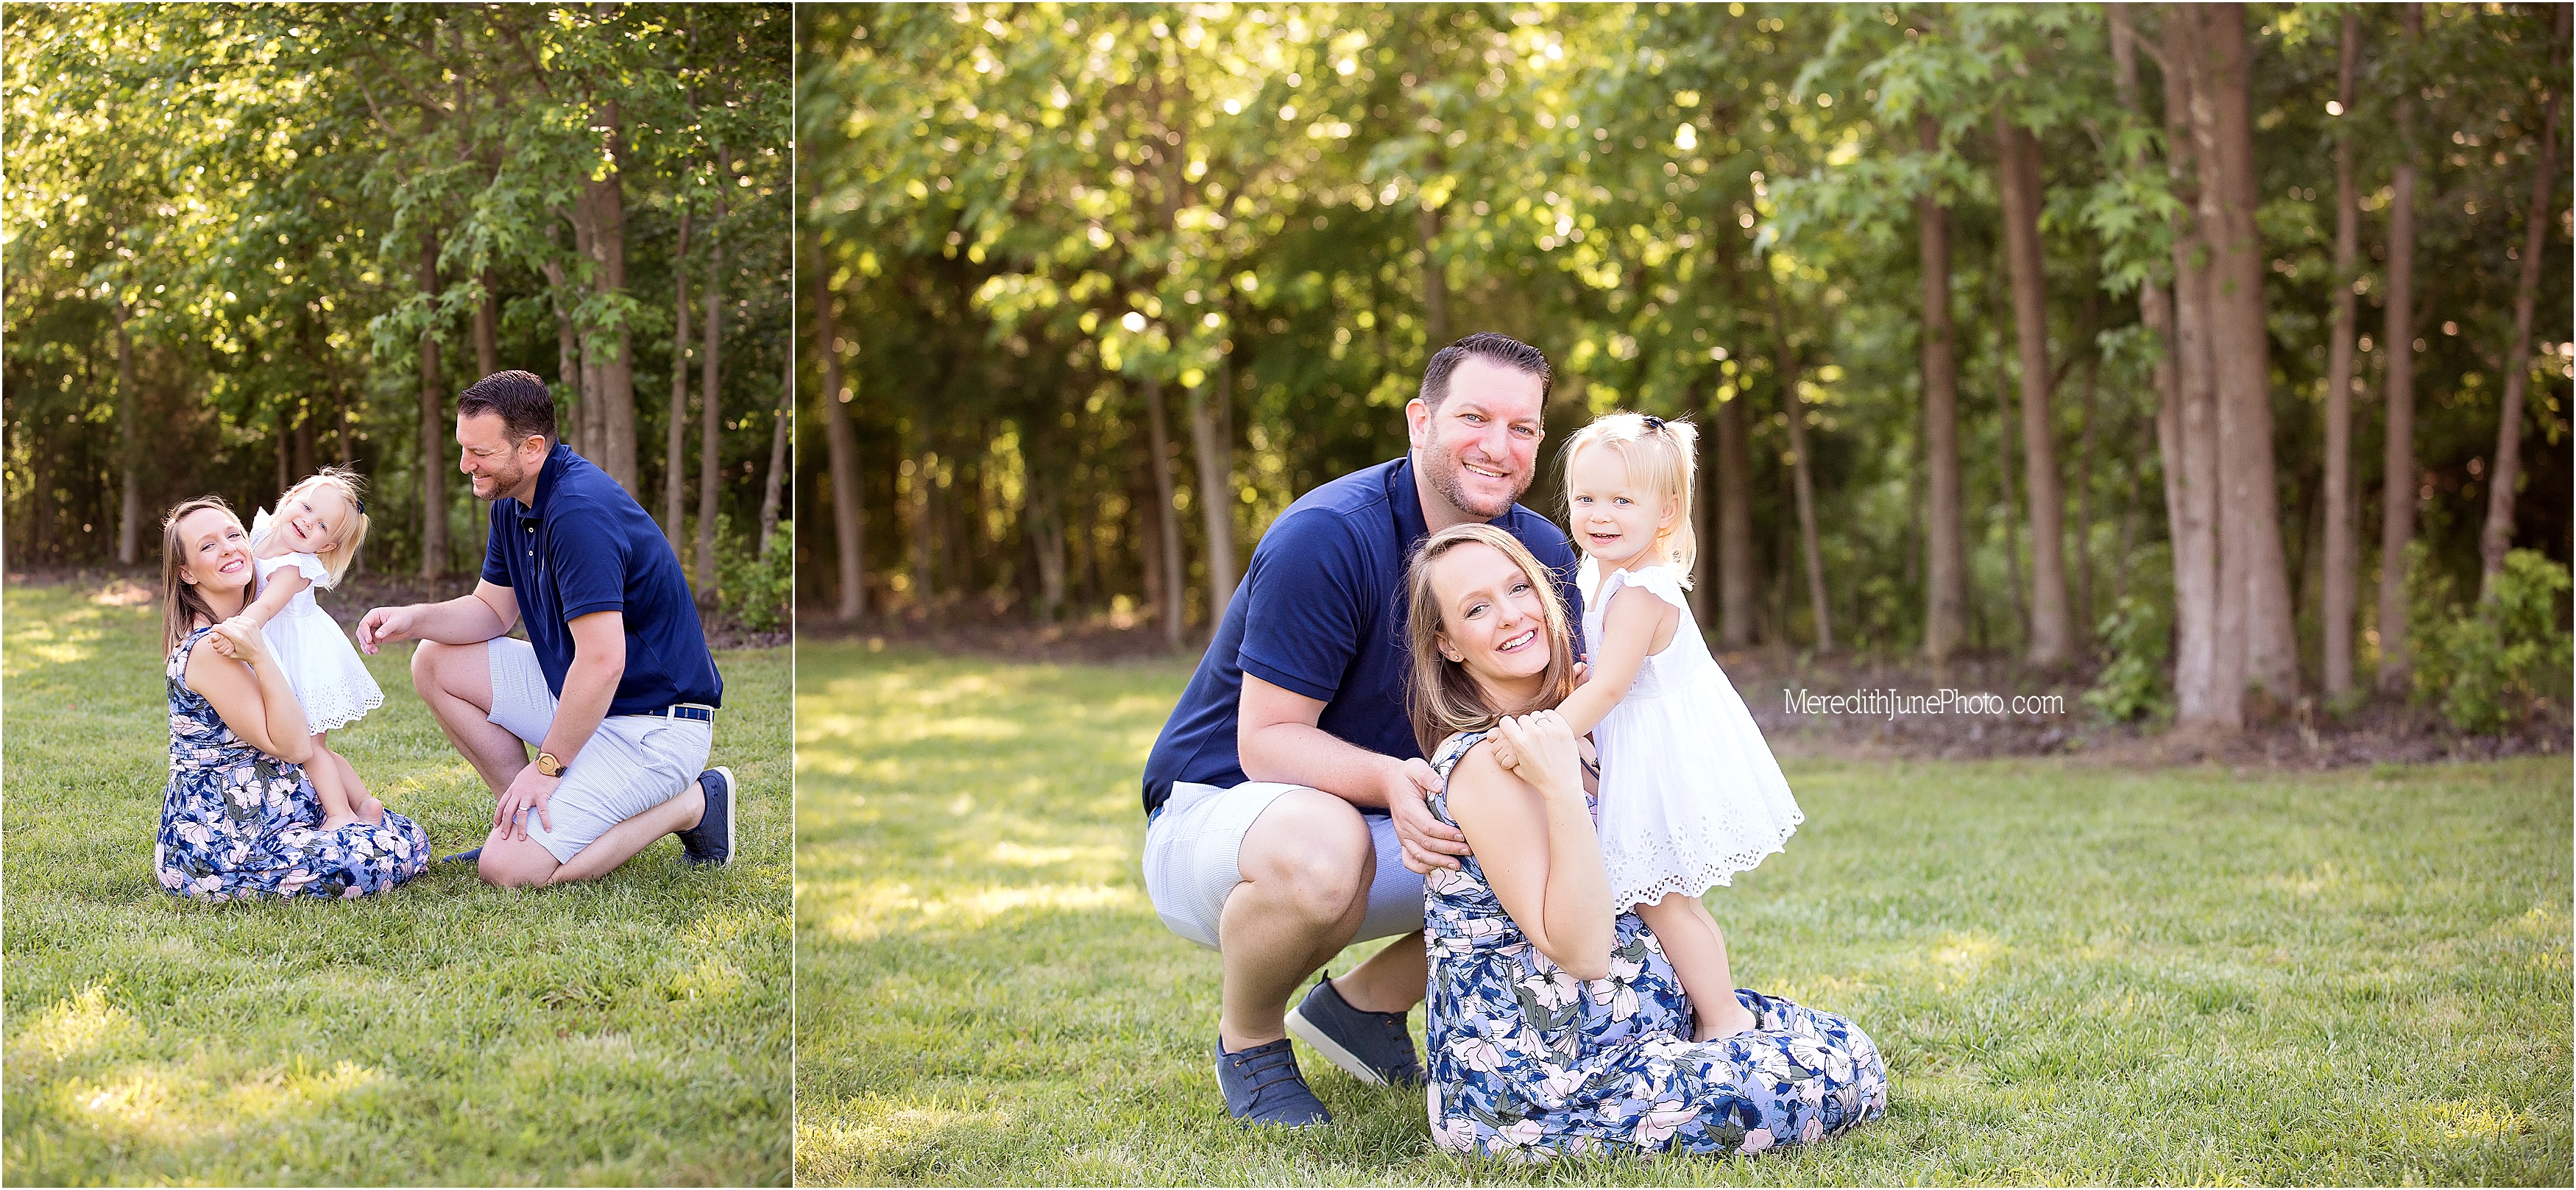 shortened outdoor maternity session with family